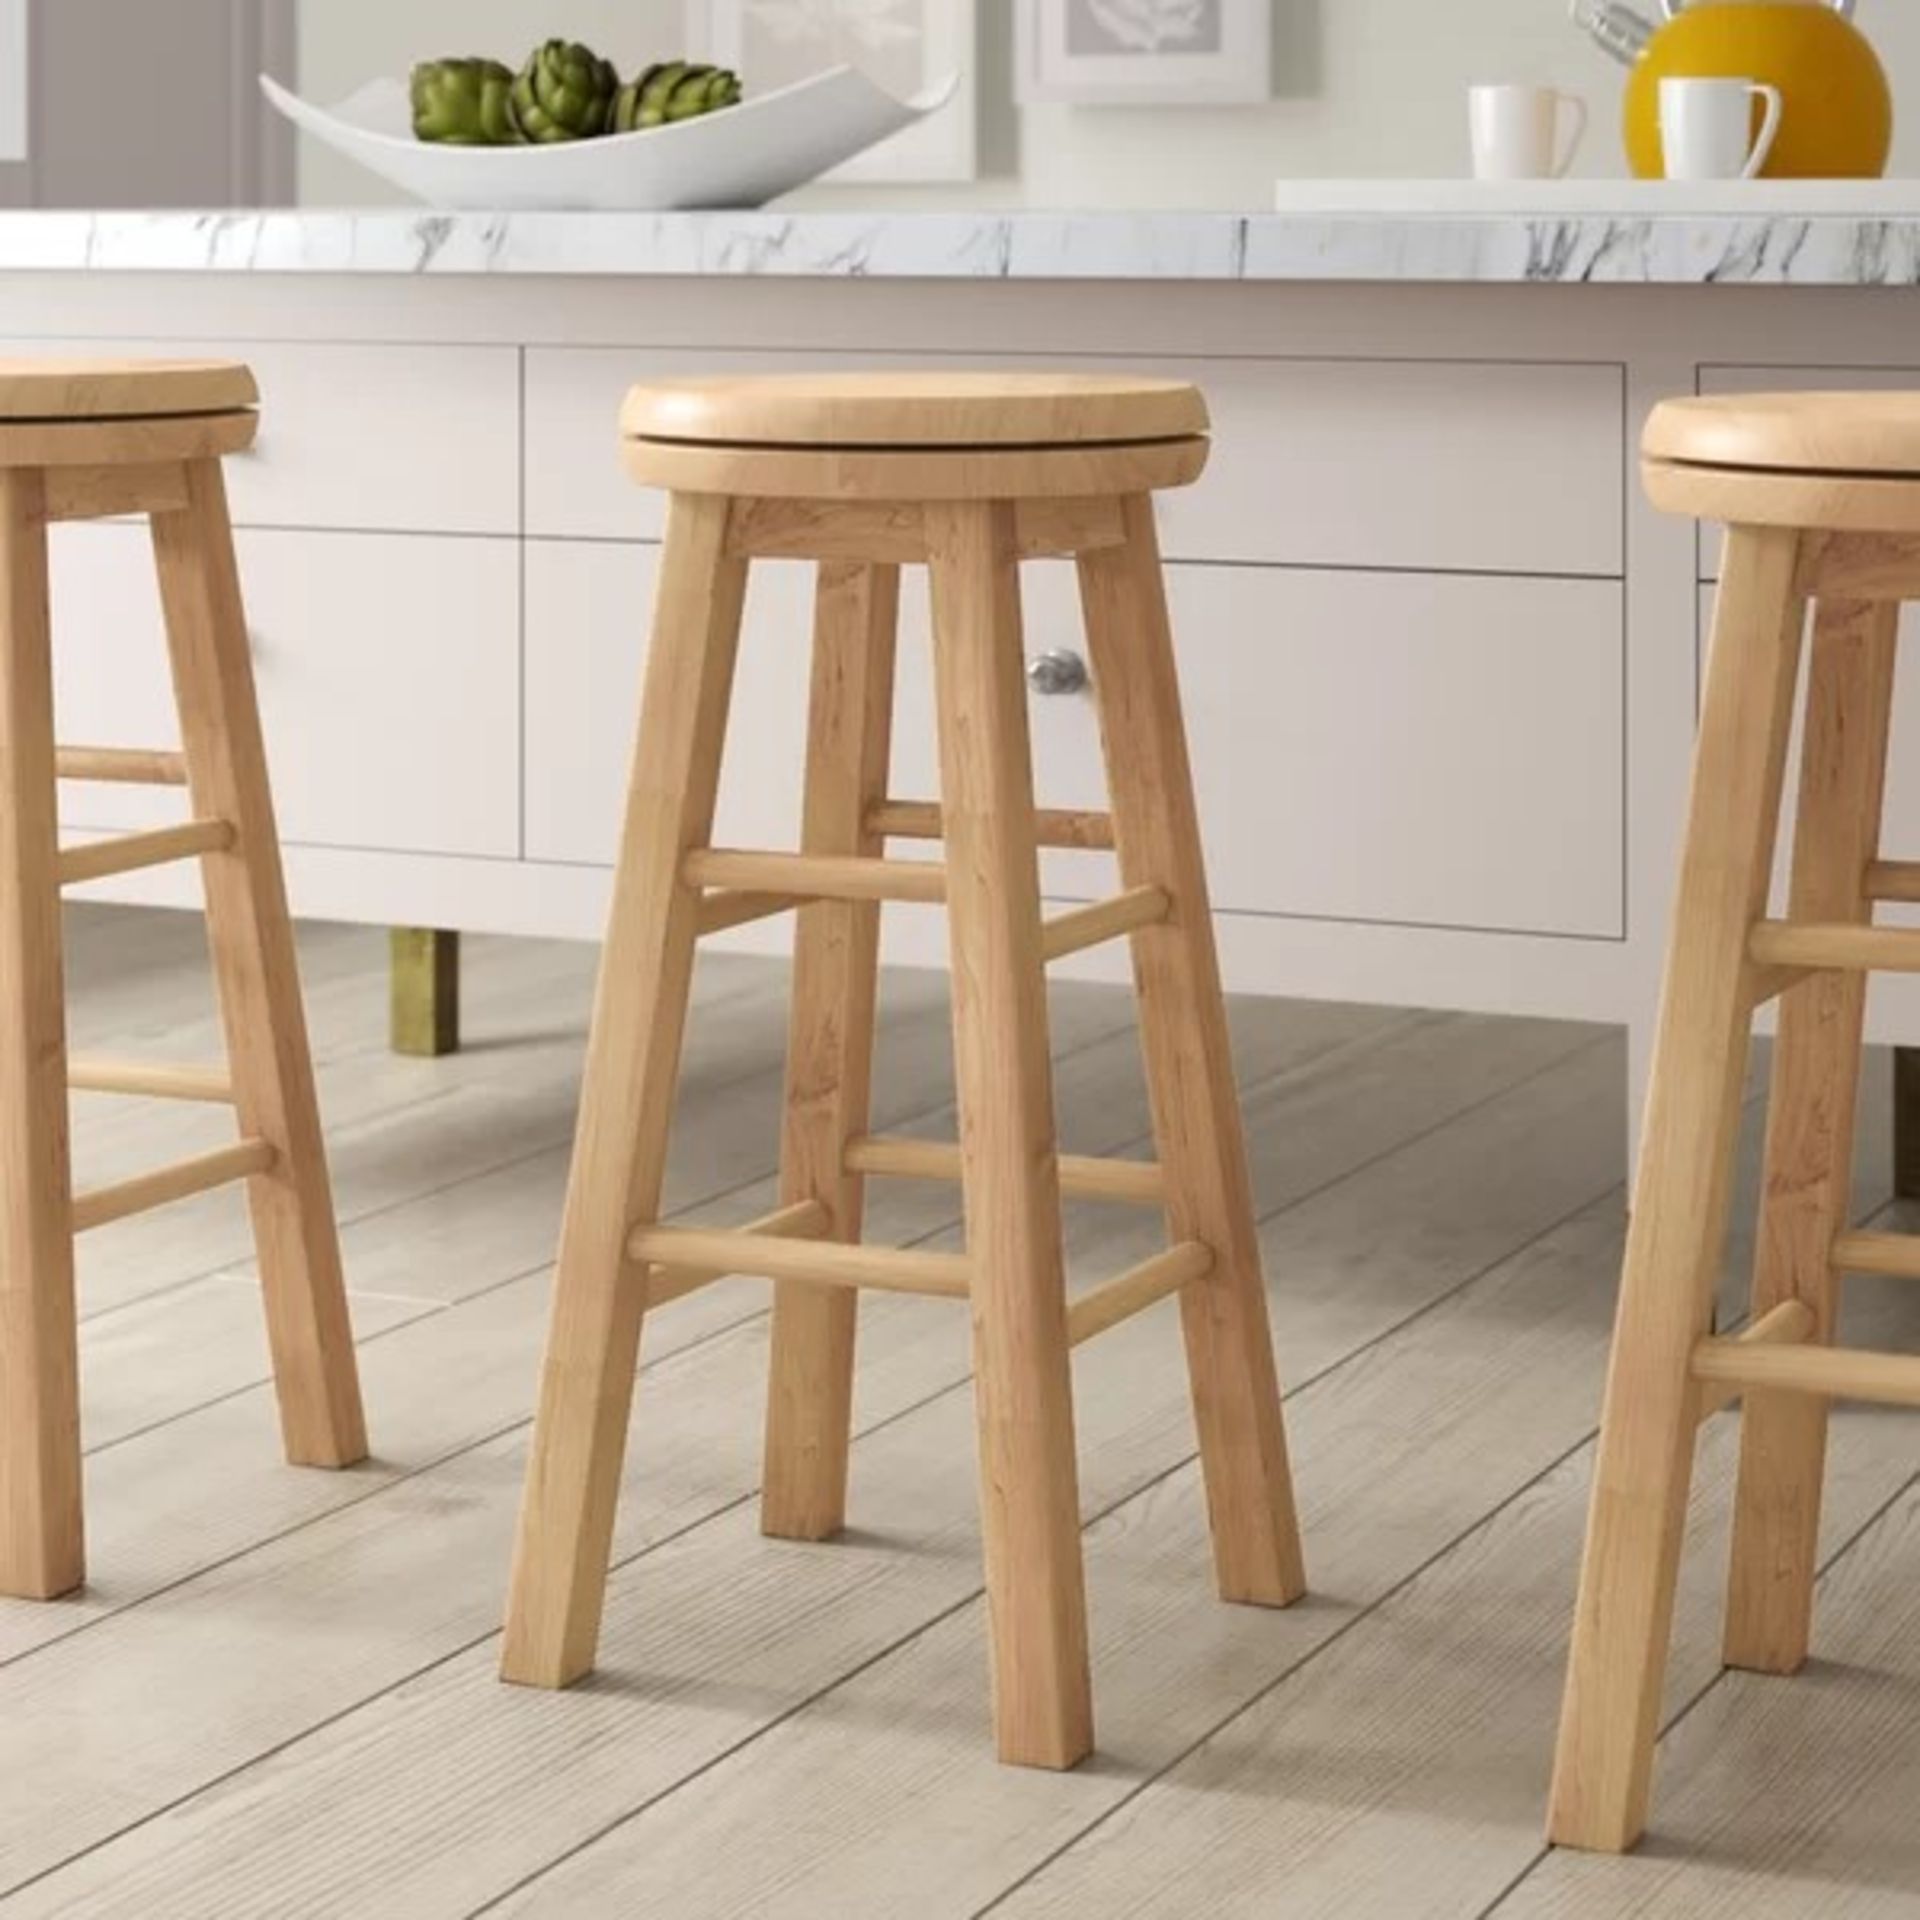 RRP £61.99 - Breakfast Swivel Bar Stool - This expertly crafted stool would be perfect for any home.